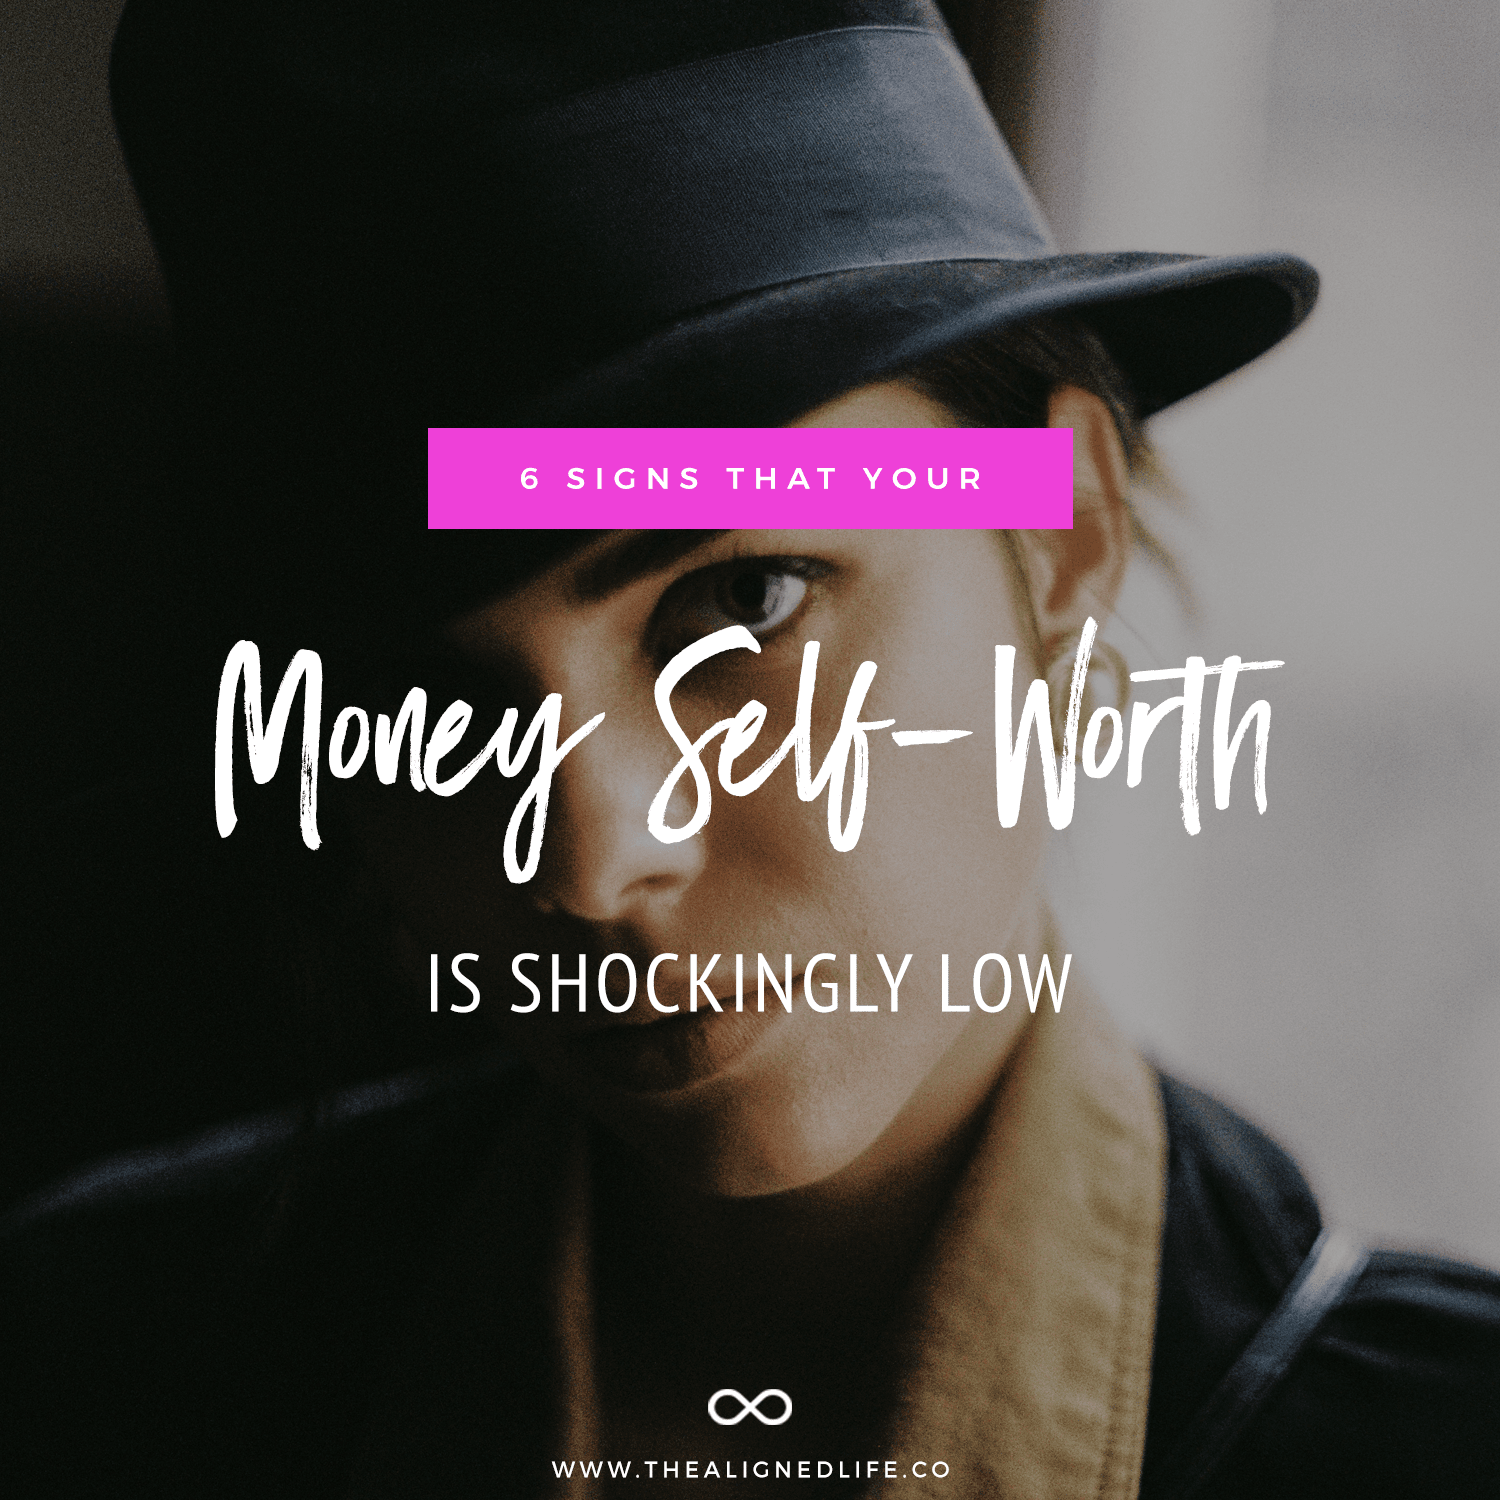 6 Signs That You Have Low Money Self-Worth